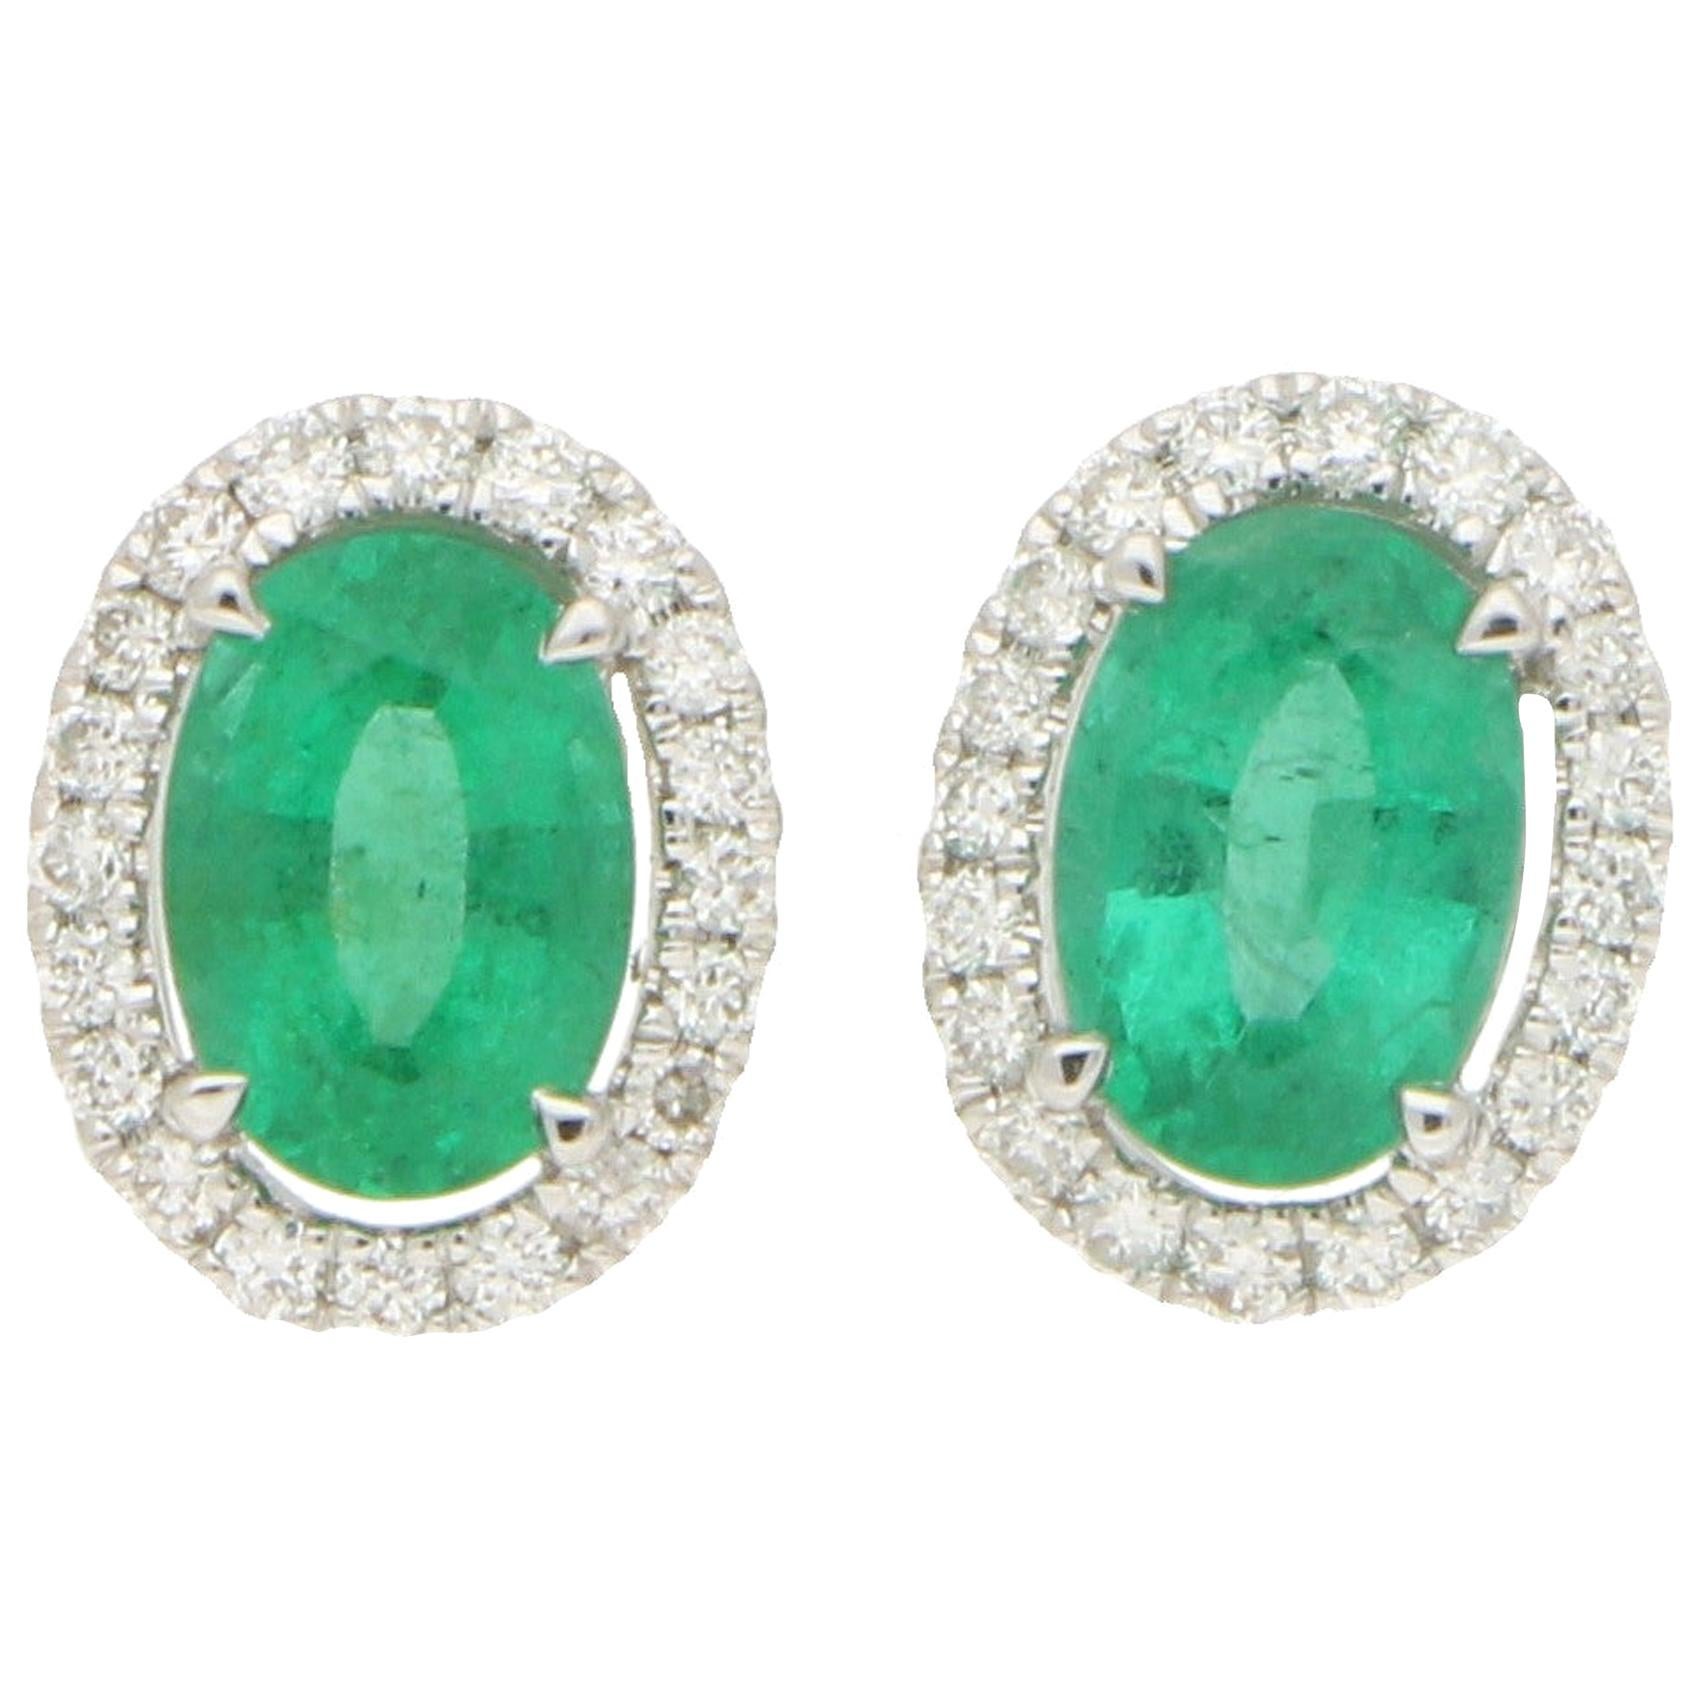 Traditional Emerald and Diamond Cluster Earrings in 18 Karat White Gold